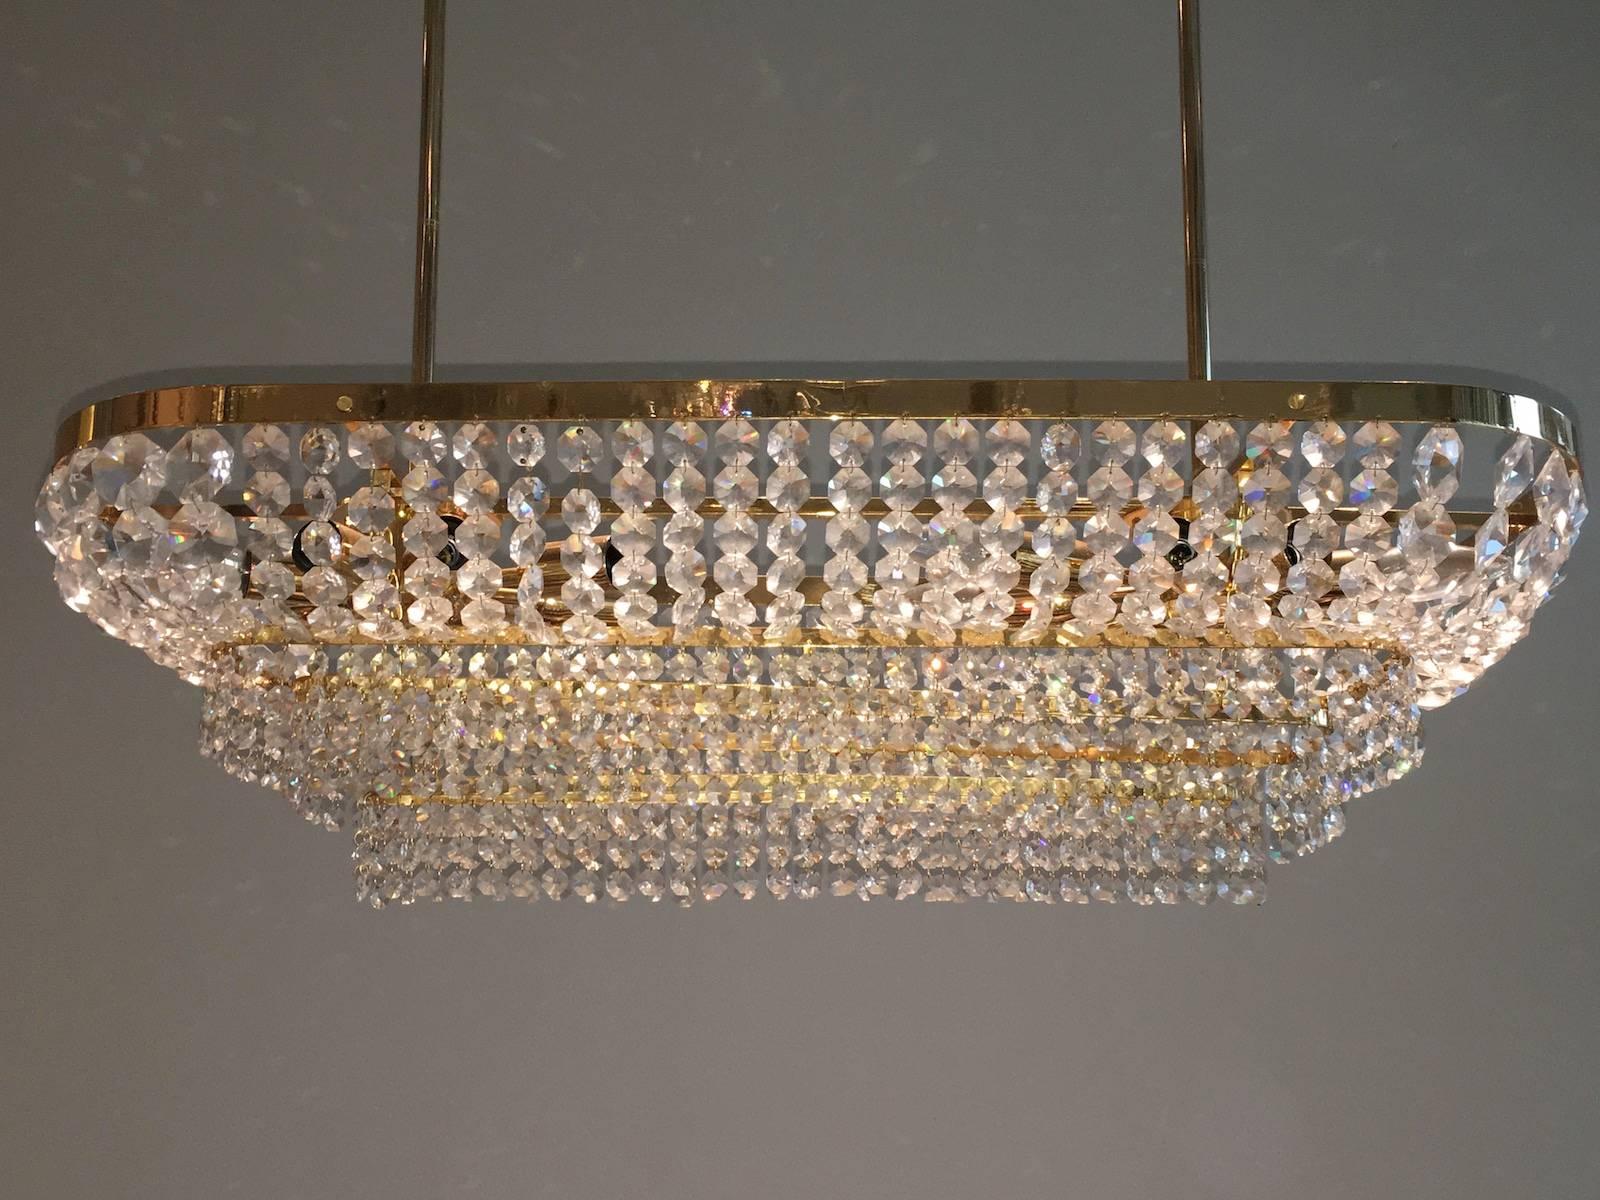 A beautiful handcrafted chandelier, manufactured in the 1970s by Palwa Germany. Made of gold-plated brass with faceted crystal glass prisms. Fixture requires 16 European E14 candelabra bulbs each up to 40 watt. An absolutely stunning piece of